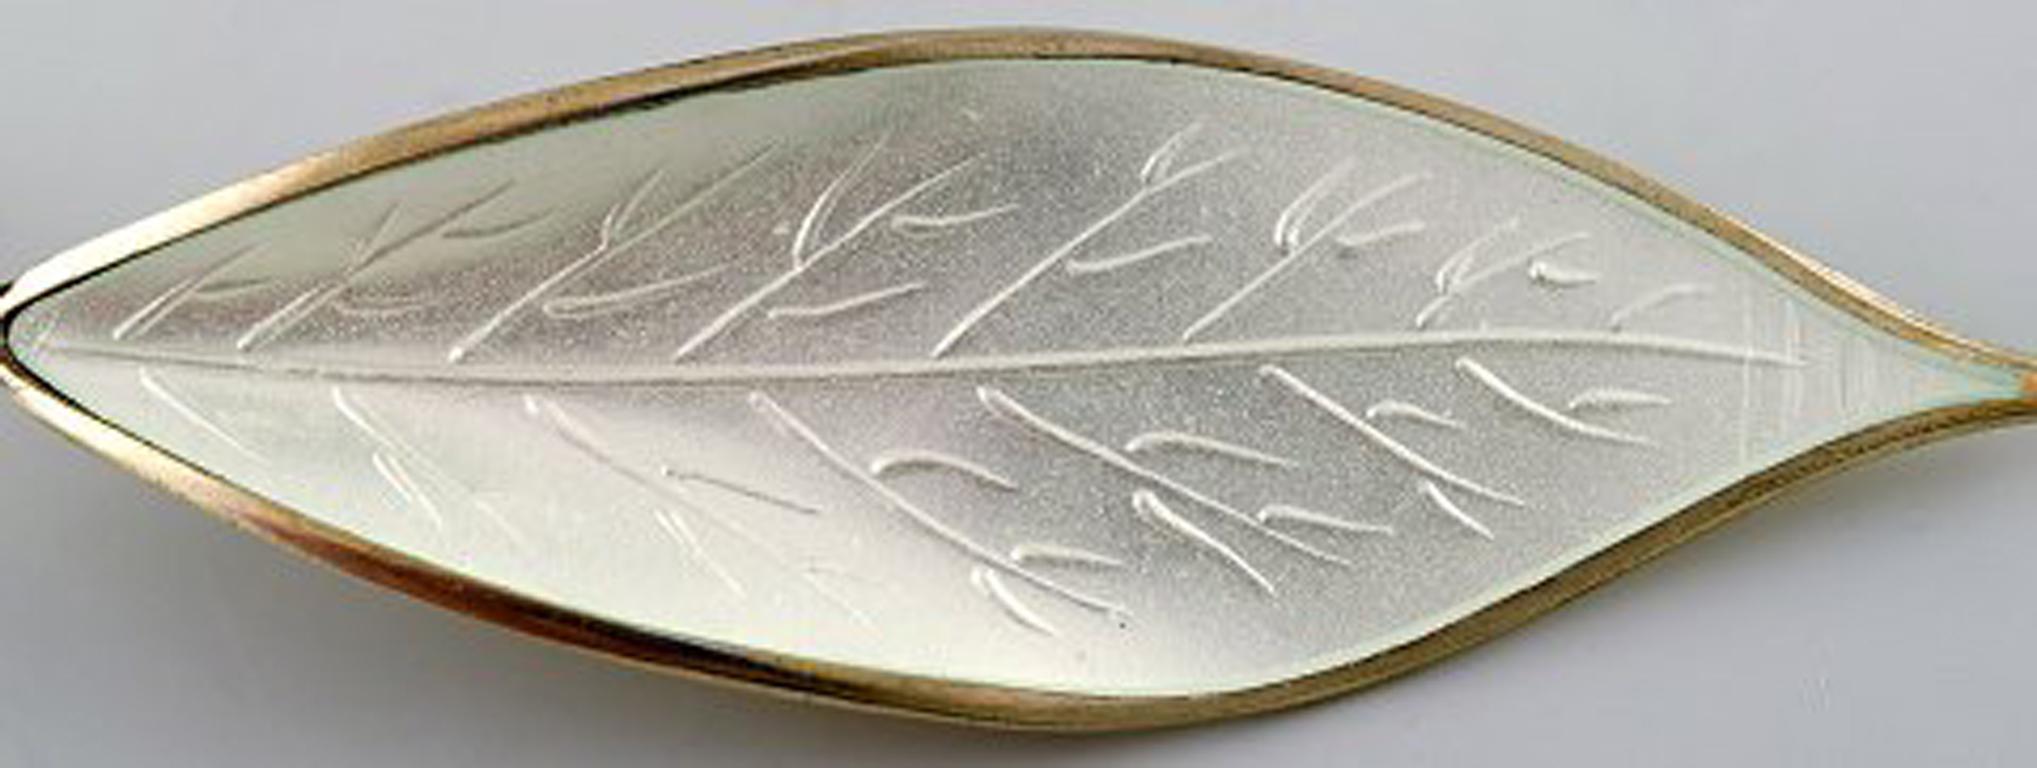 David Andersen. Norwegian brooch in gold plated sterling silver in the form of a leaf with enamel work. 1970's.
In very good condition.
Measures: 7 x 2 cm.
Stamped: D-A / 925.